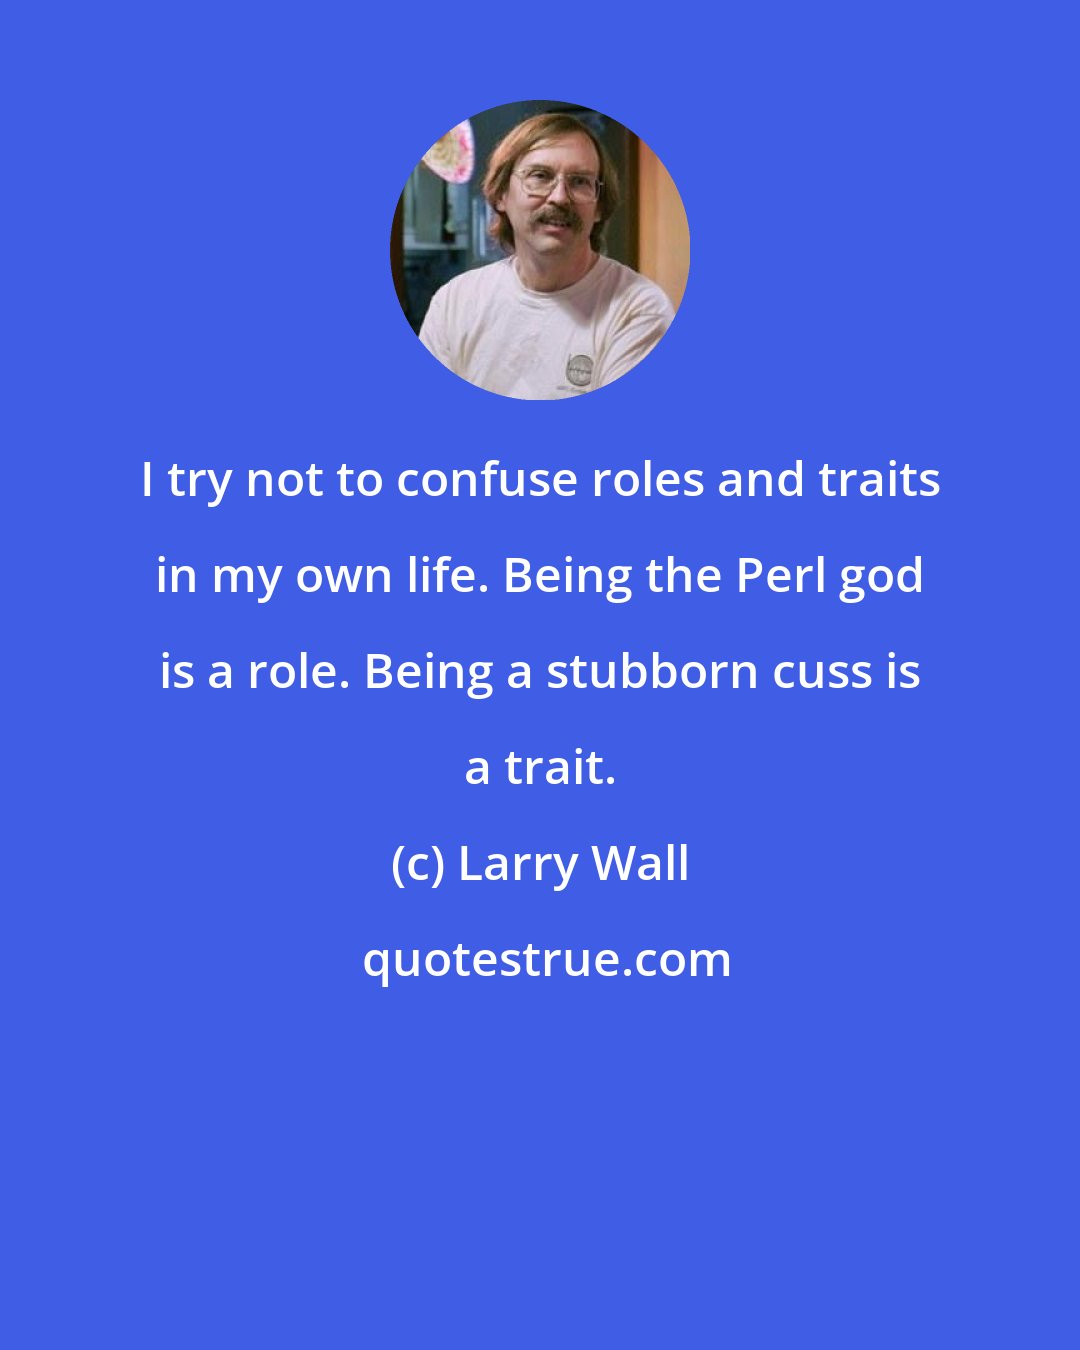 Larry Wall: I try not to confuse roles and traits in my own life. Being the Perl god is a role. Being a stubborn cuss is a trait.